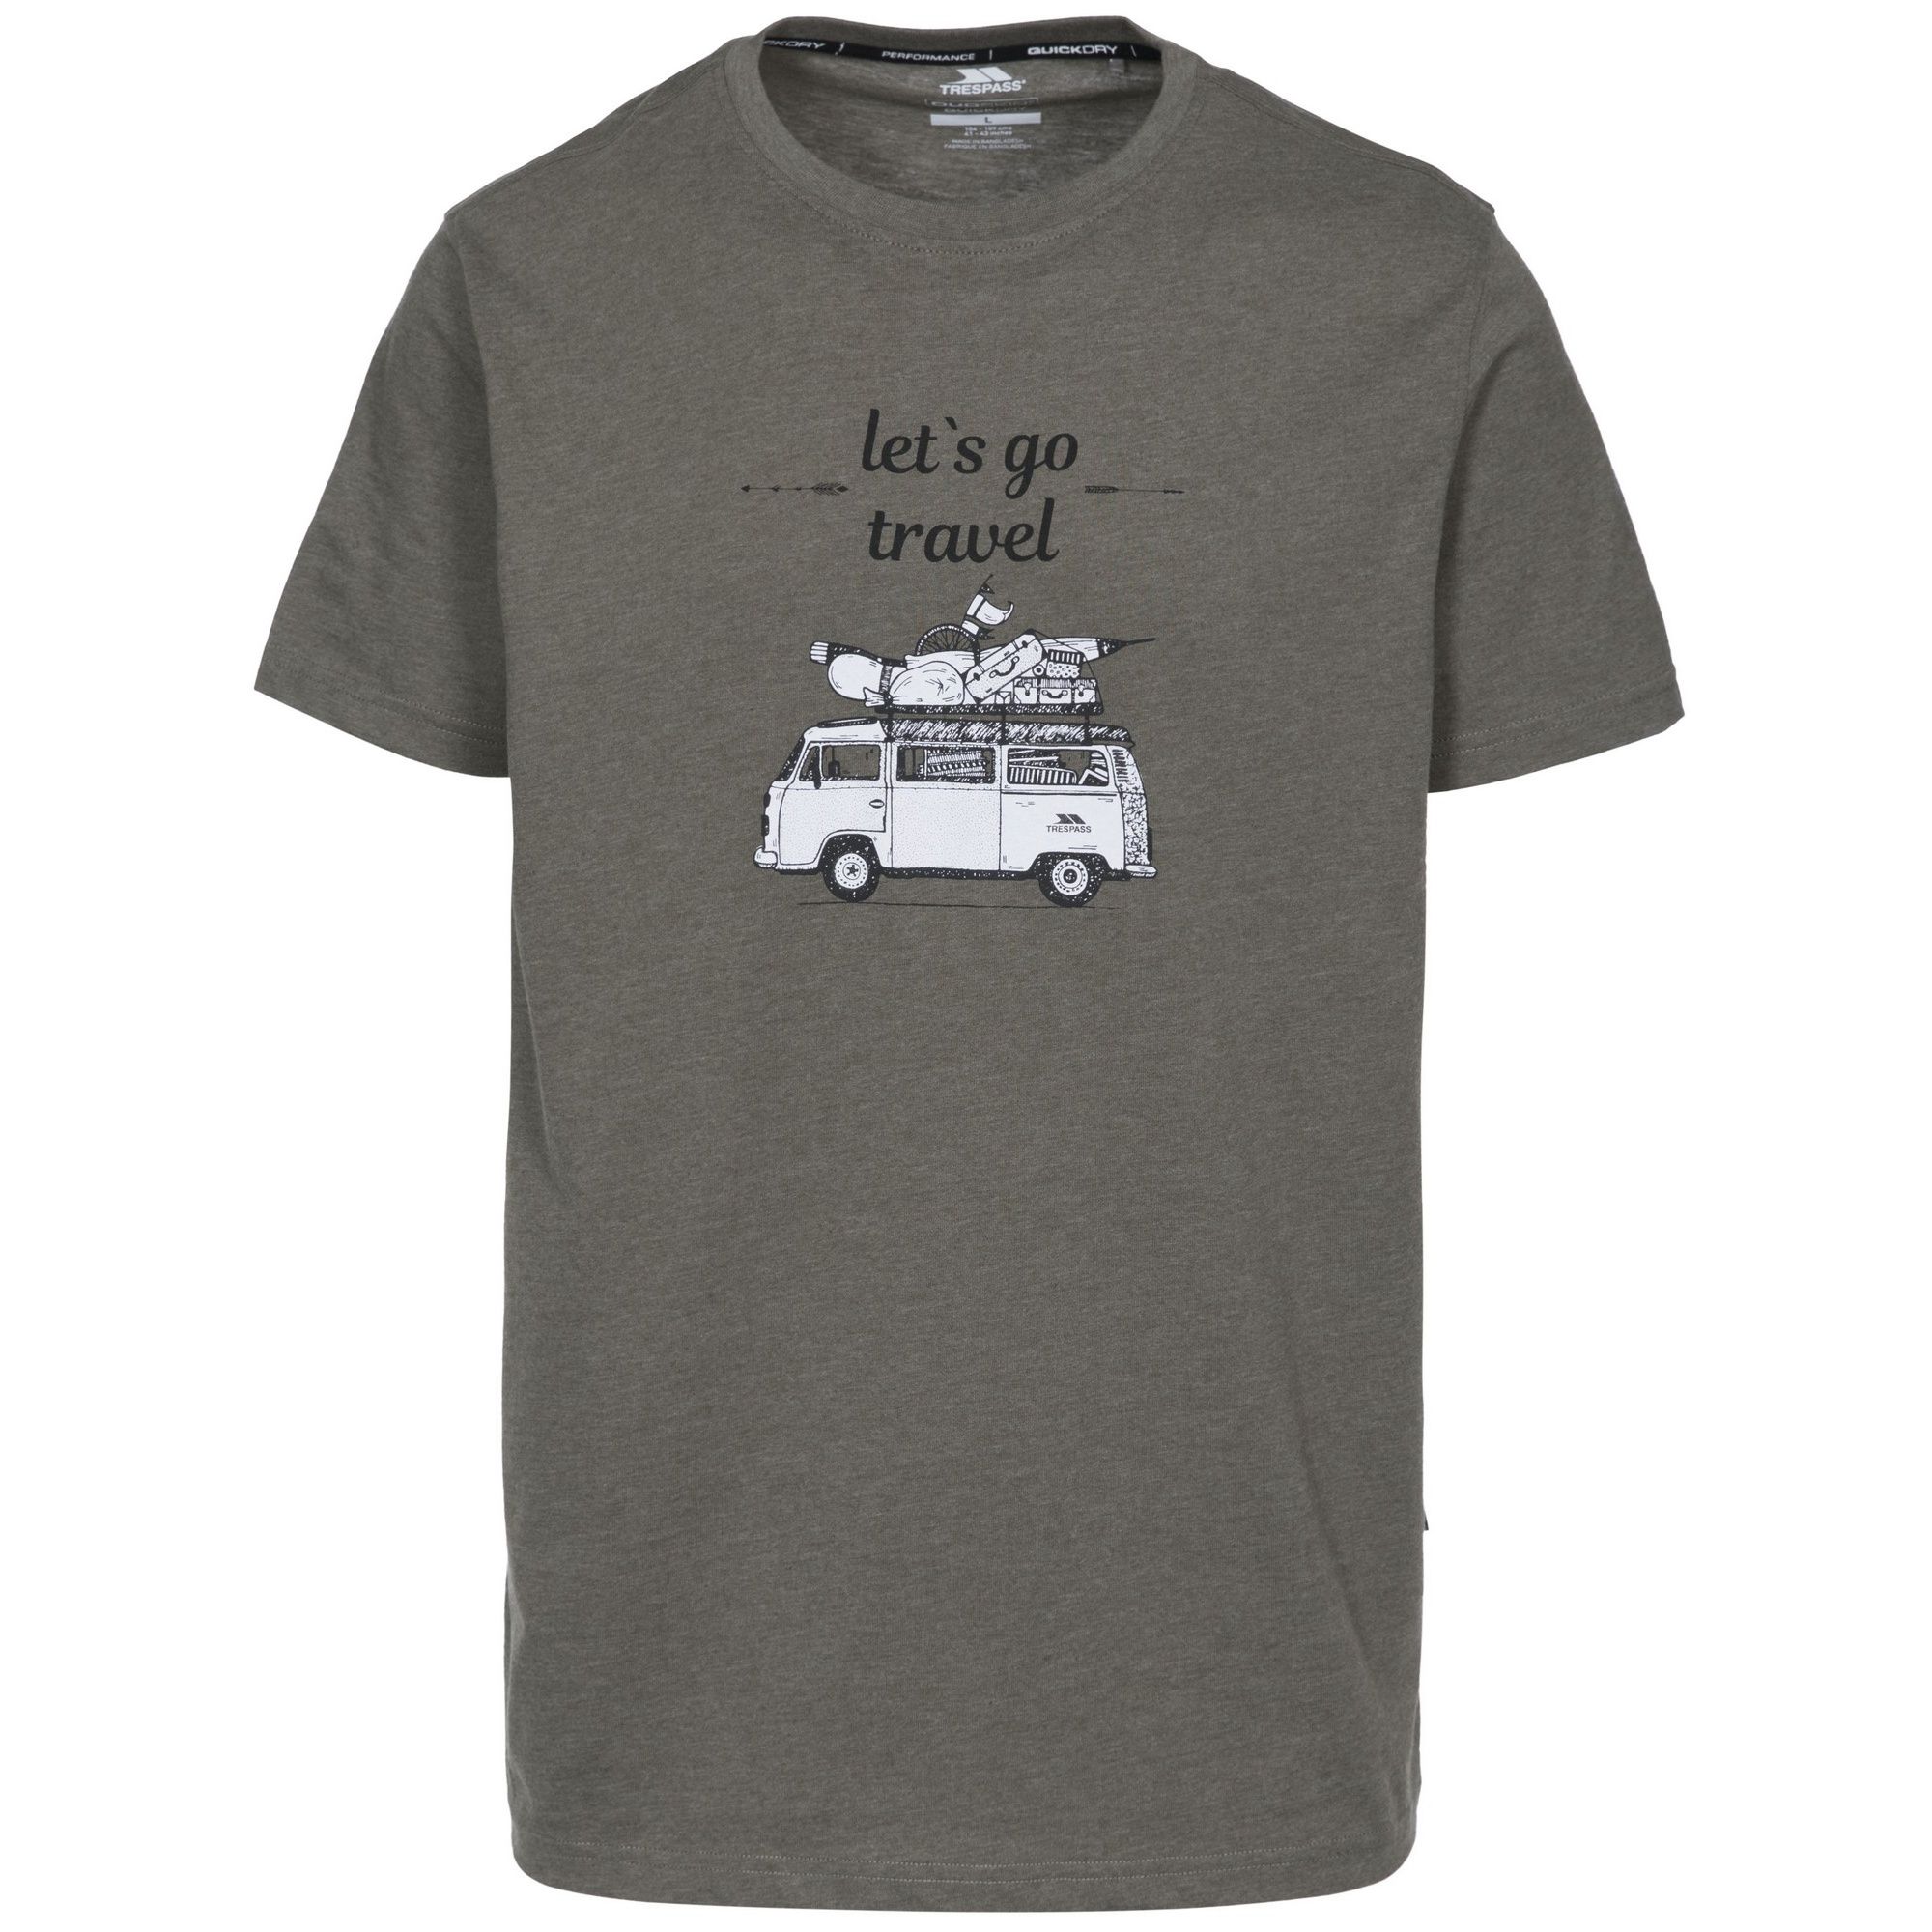 Mens short sleeve t-shirt with a travel van graphic print design on chest. Round neck. Quick drying. Materials: 60% cotton/ 40% polyester.